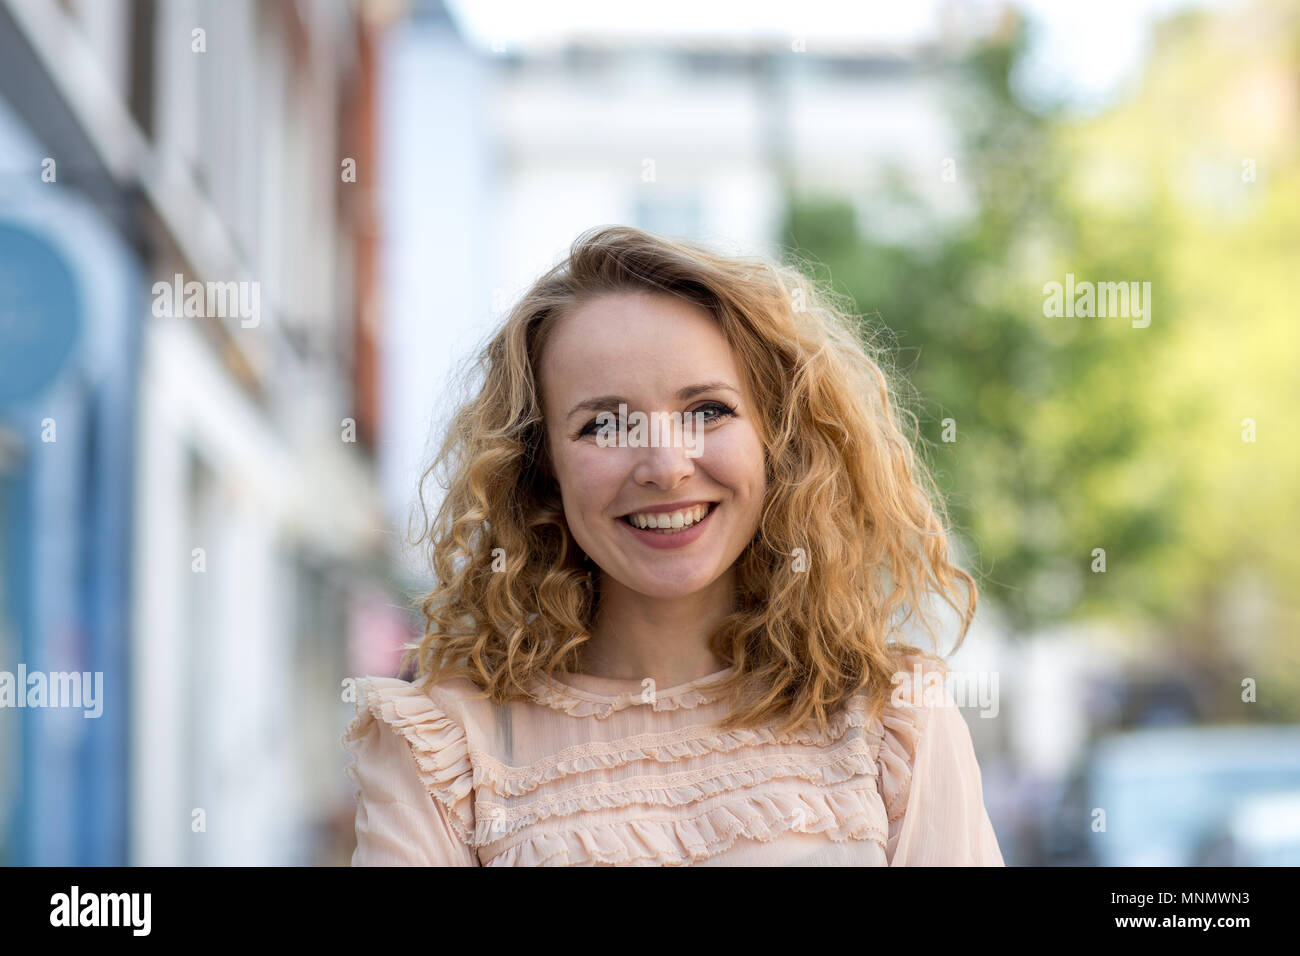 Adult female smiling outdoors in city Stock Photo